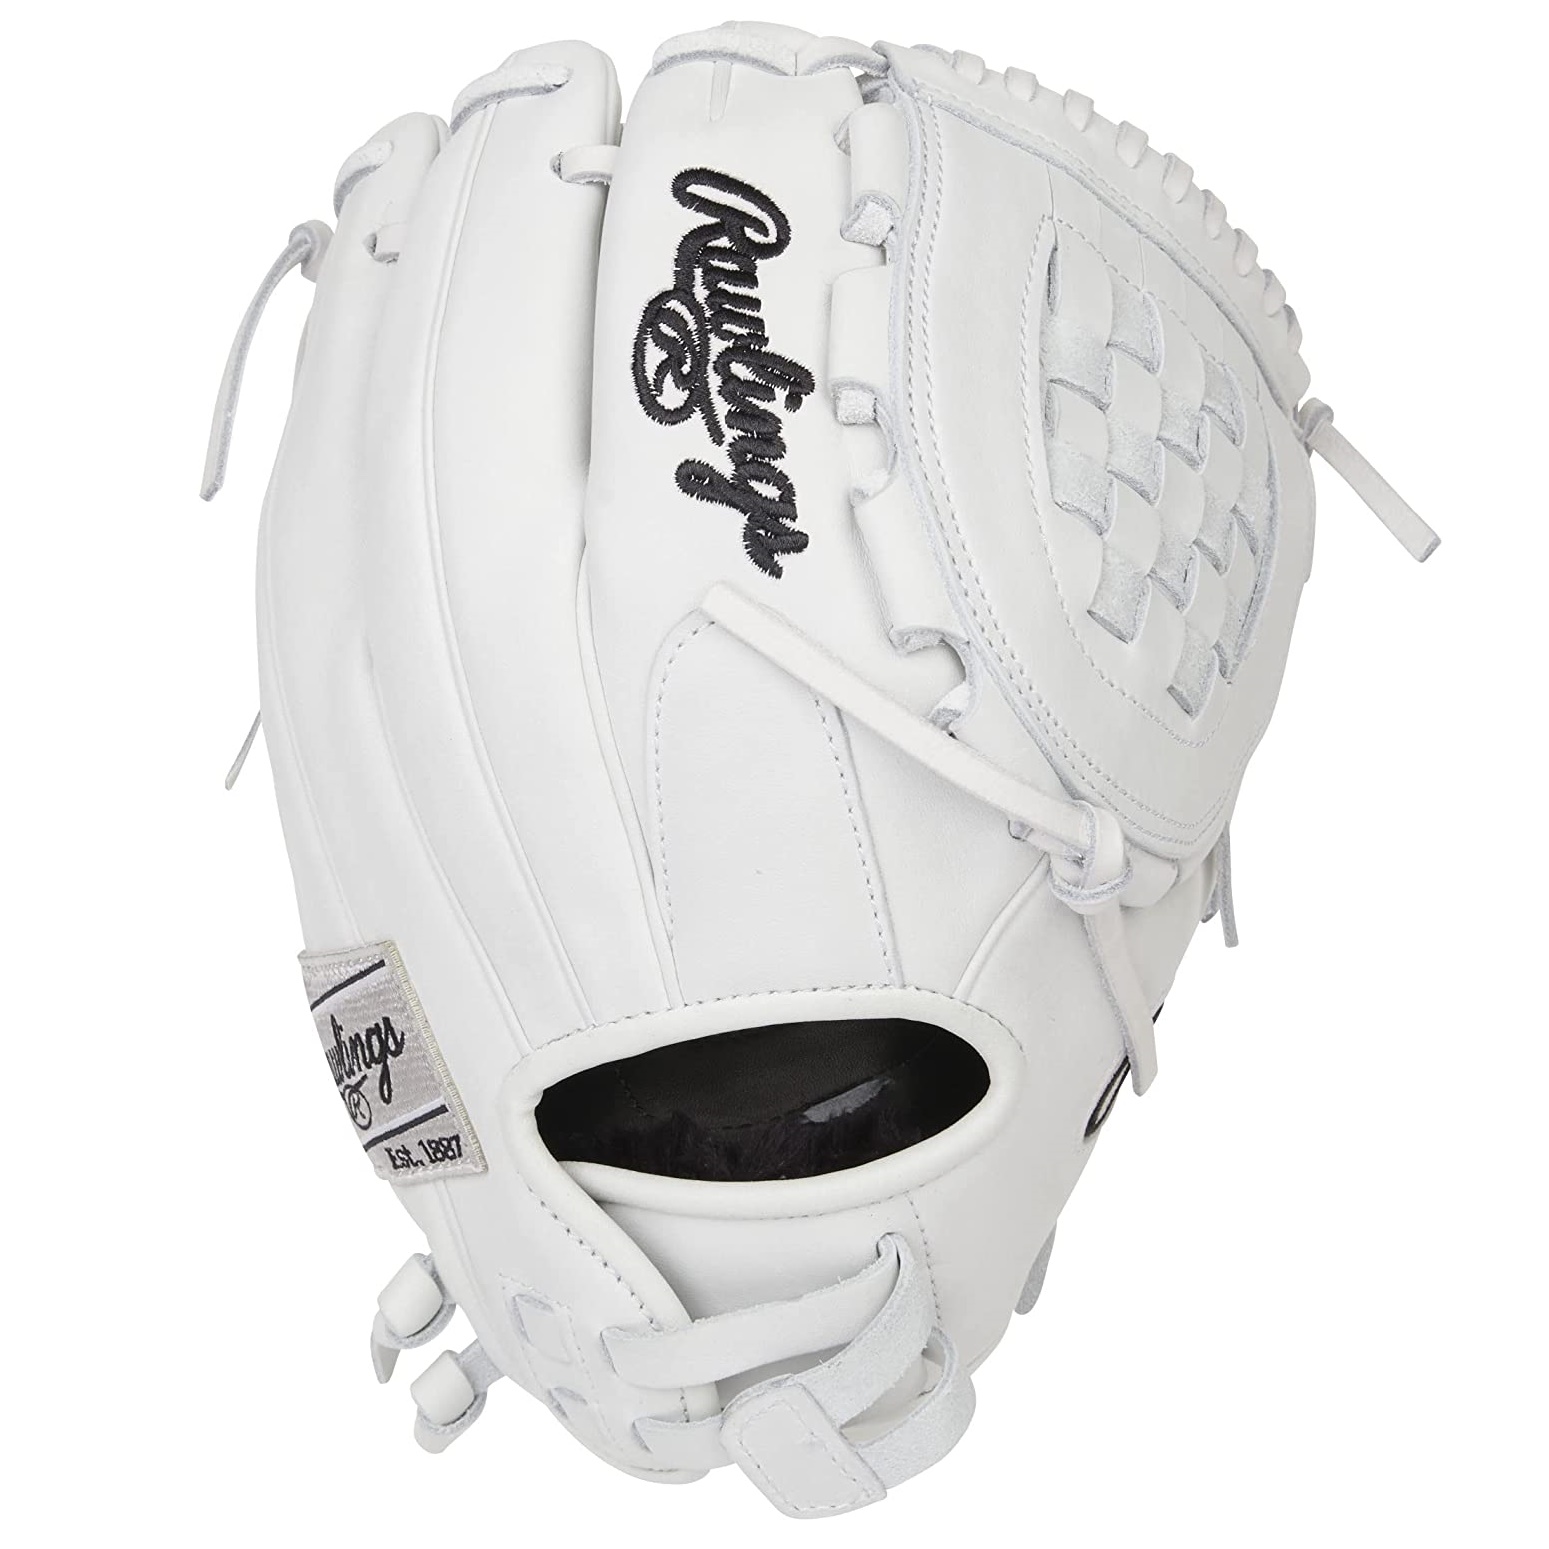 The Rawlings Liberty Advanced 11.5-inch softball glove offers fastpitch players of any level a glove that brings reliable performance and durability to the diamond. Featuring smooth, full-grain leather and quick, easy break-in, these gloves are built to perform right away. Also, our improved pull-strap back ensures that each player has a comfortable fit.    Back: Adjustable Pull Strap     Fit: Narrow     Leather: Quality, Full-Grain Leather     Padding: PORON XRD Palm Pad     Player Break-In: 30     Series: Liberty Advanced     Shell: Full-Grain Leather     Sport: Softball     Throwing Hand: Right     Usage: Gloves     Web: Basket     Age Group: Pro/College, High School, 14U   